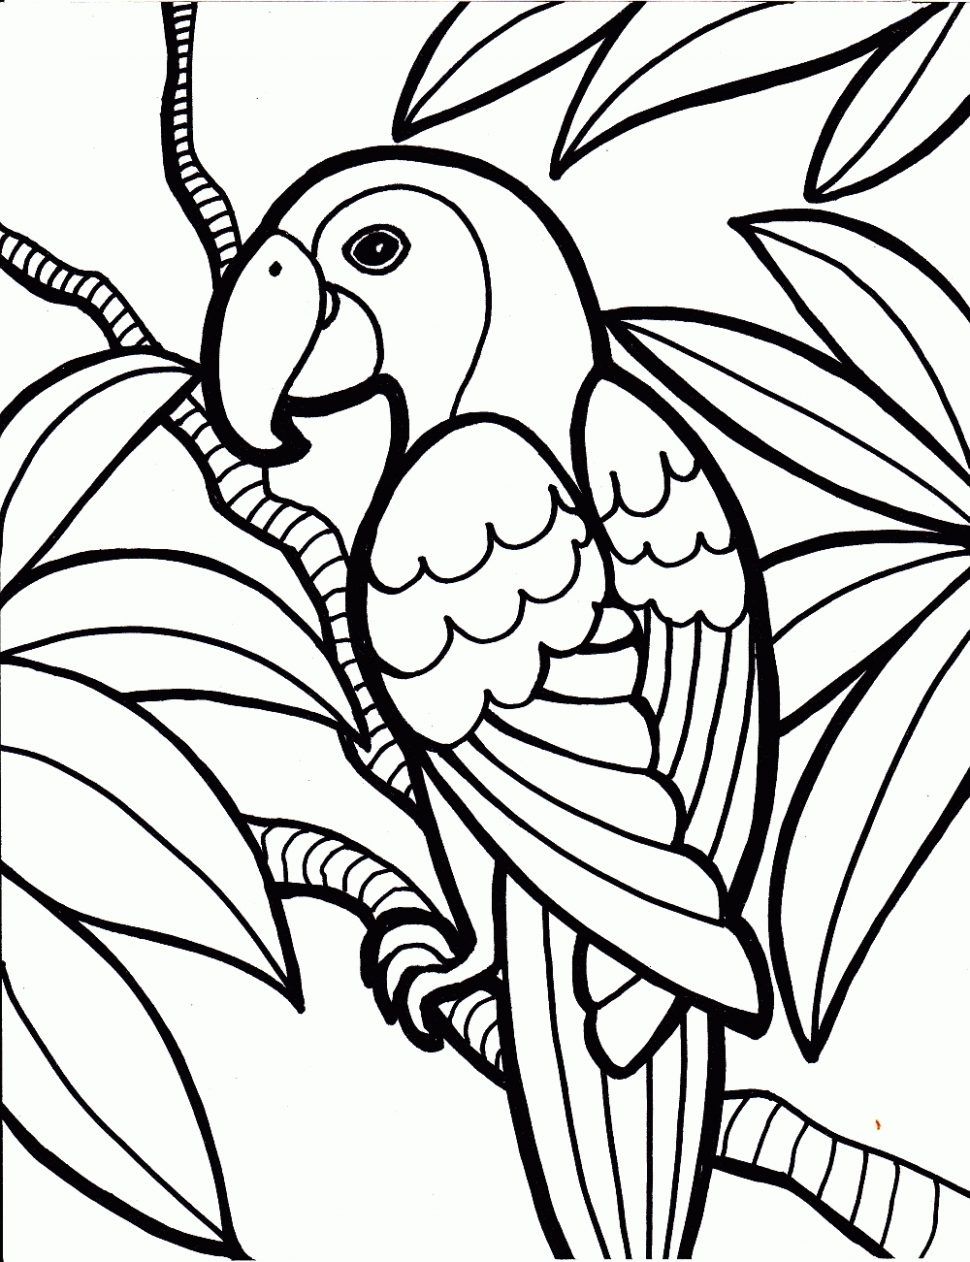 Crayola Coloring Pages For Kids Printable at GetDrawings | Free download